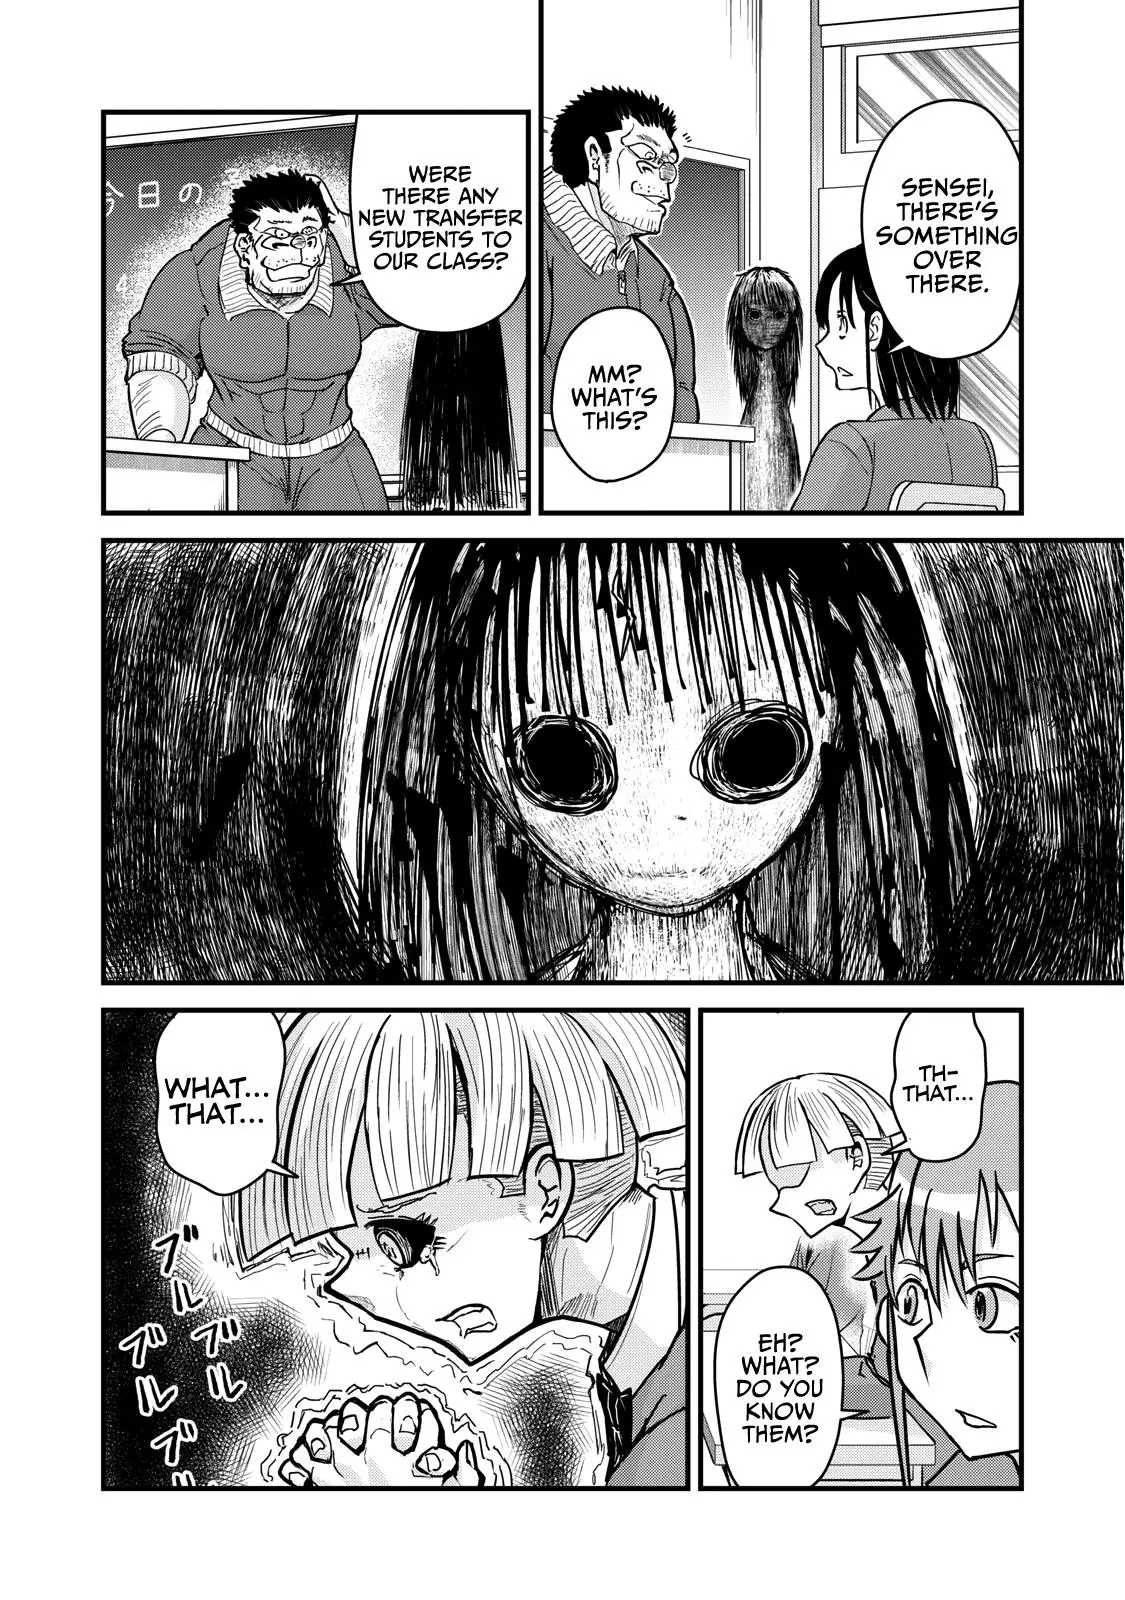 A Manga About The Kind Of Pe Teacher Who Dies At The Start Of A School Horror Movie - 76 page 11-13056d0e